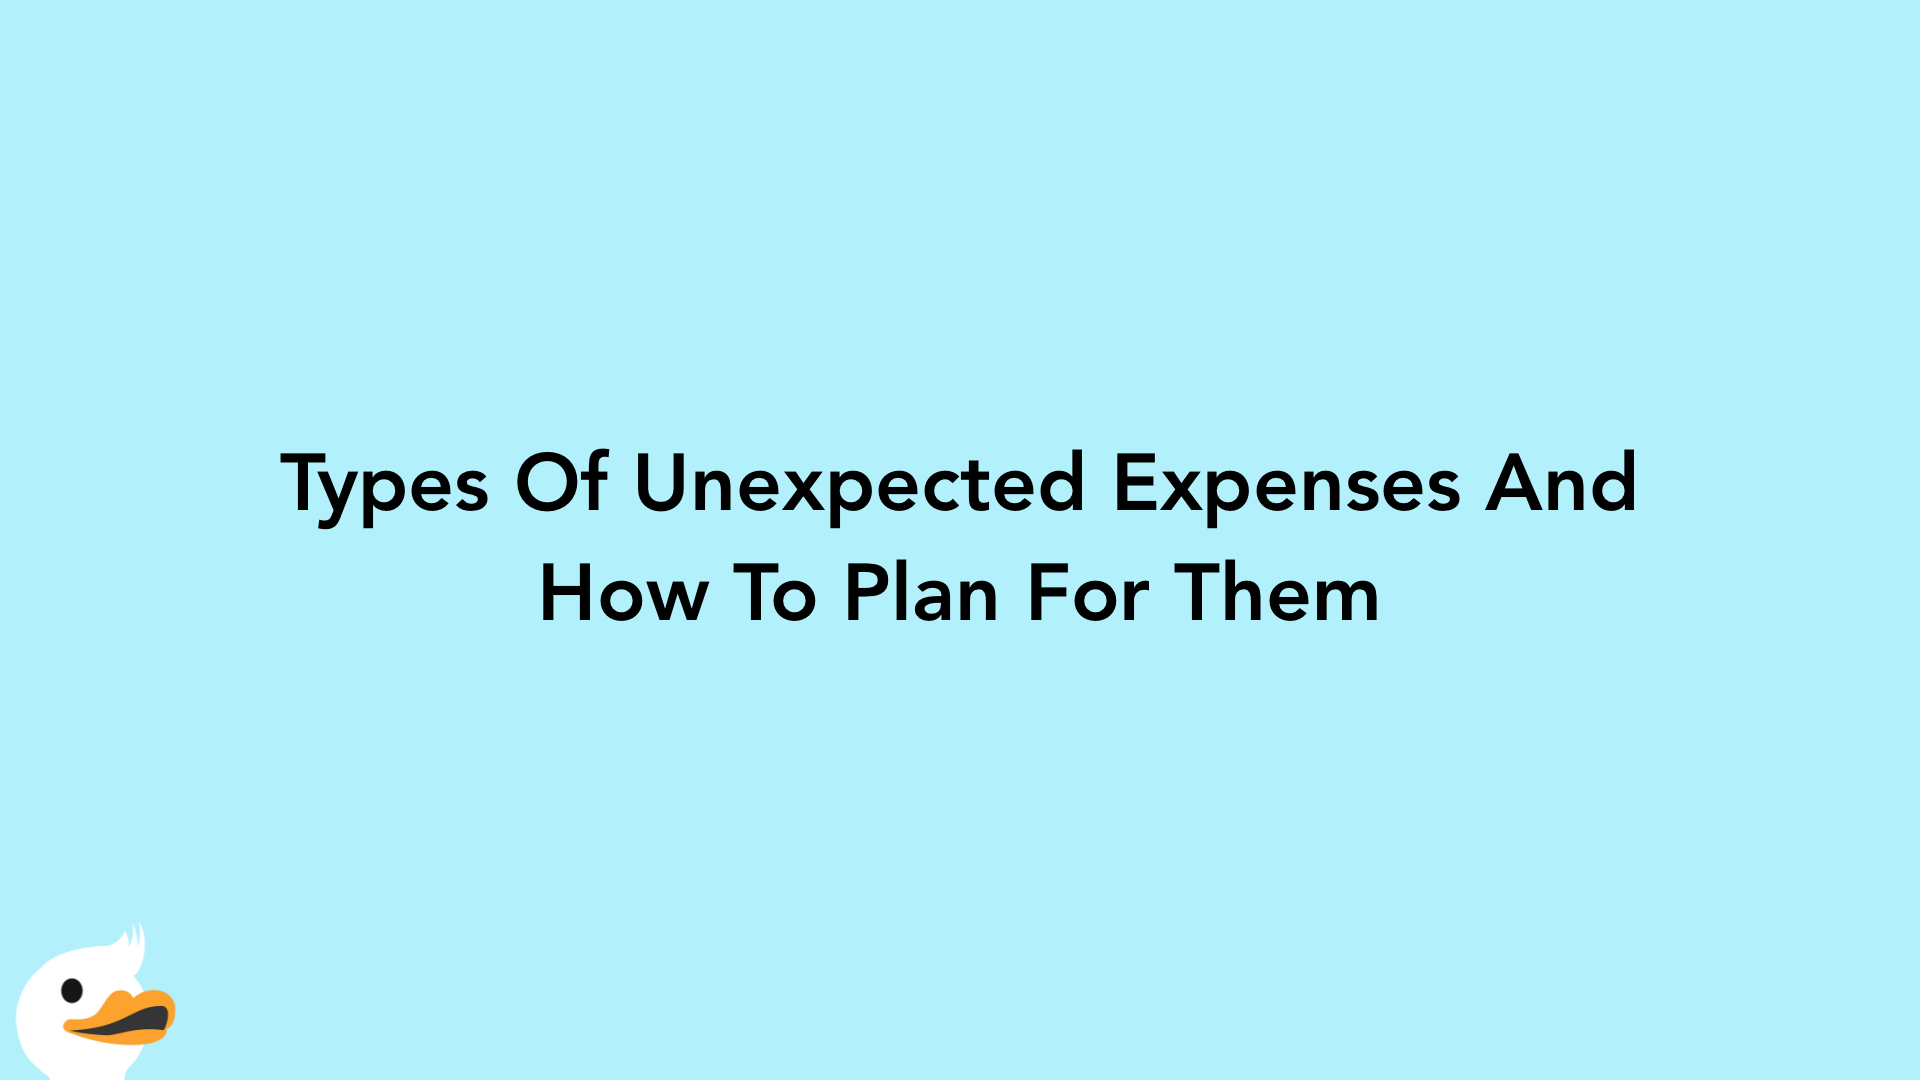 Types Of Unexpected Expenses And How To Plan For Them